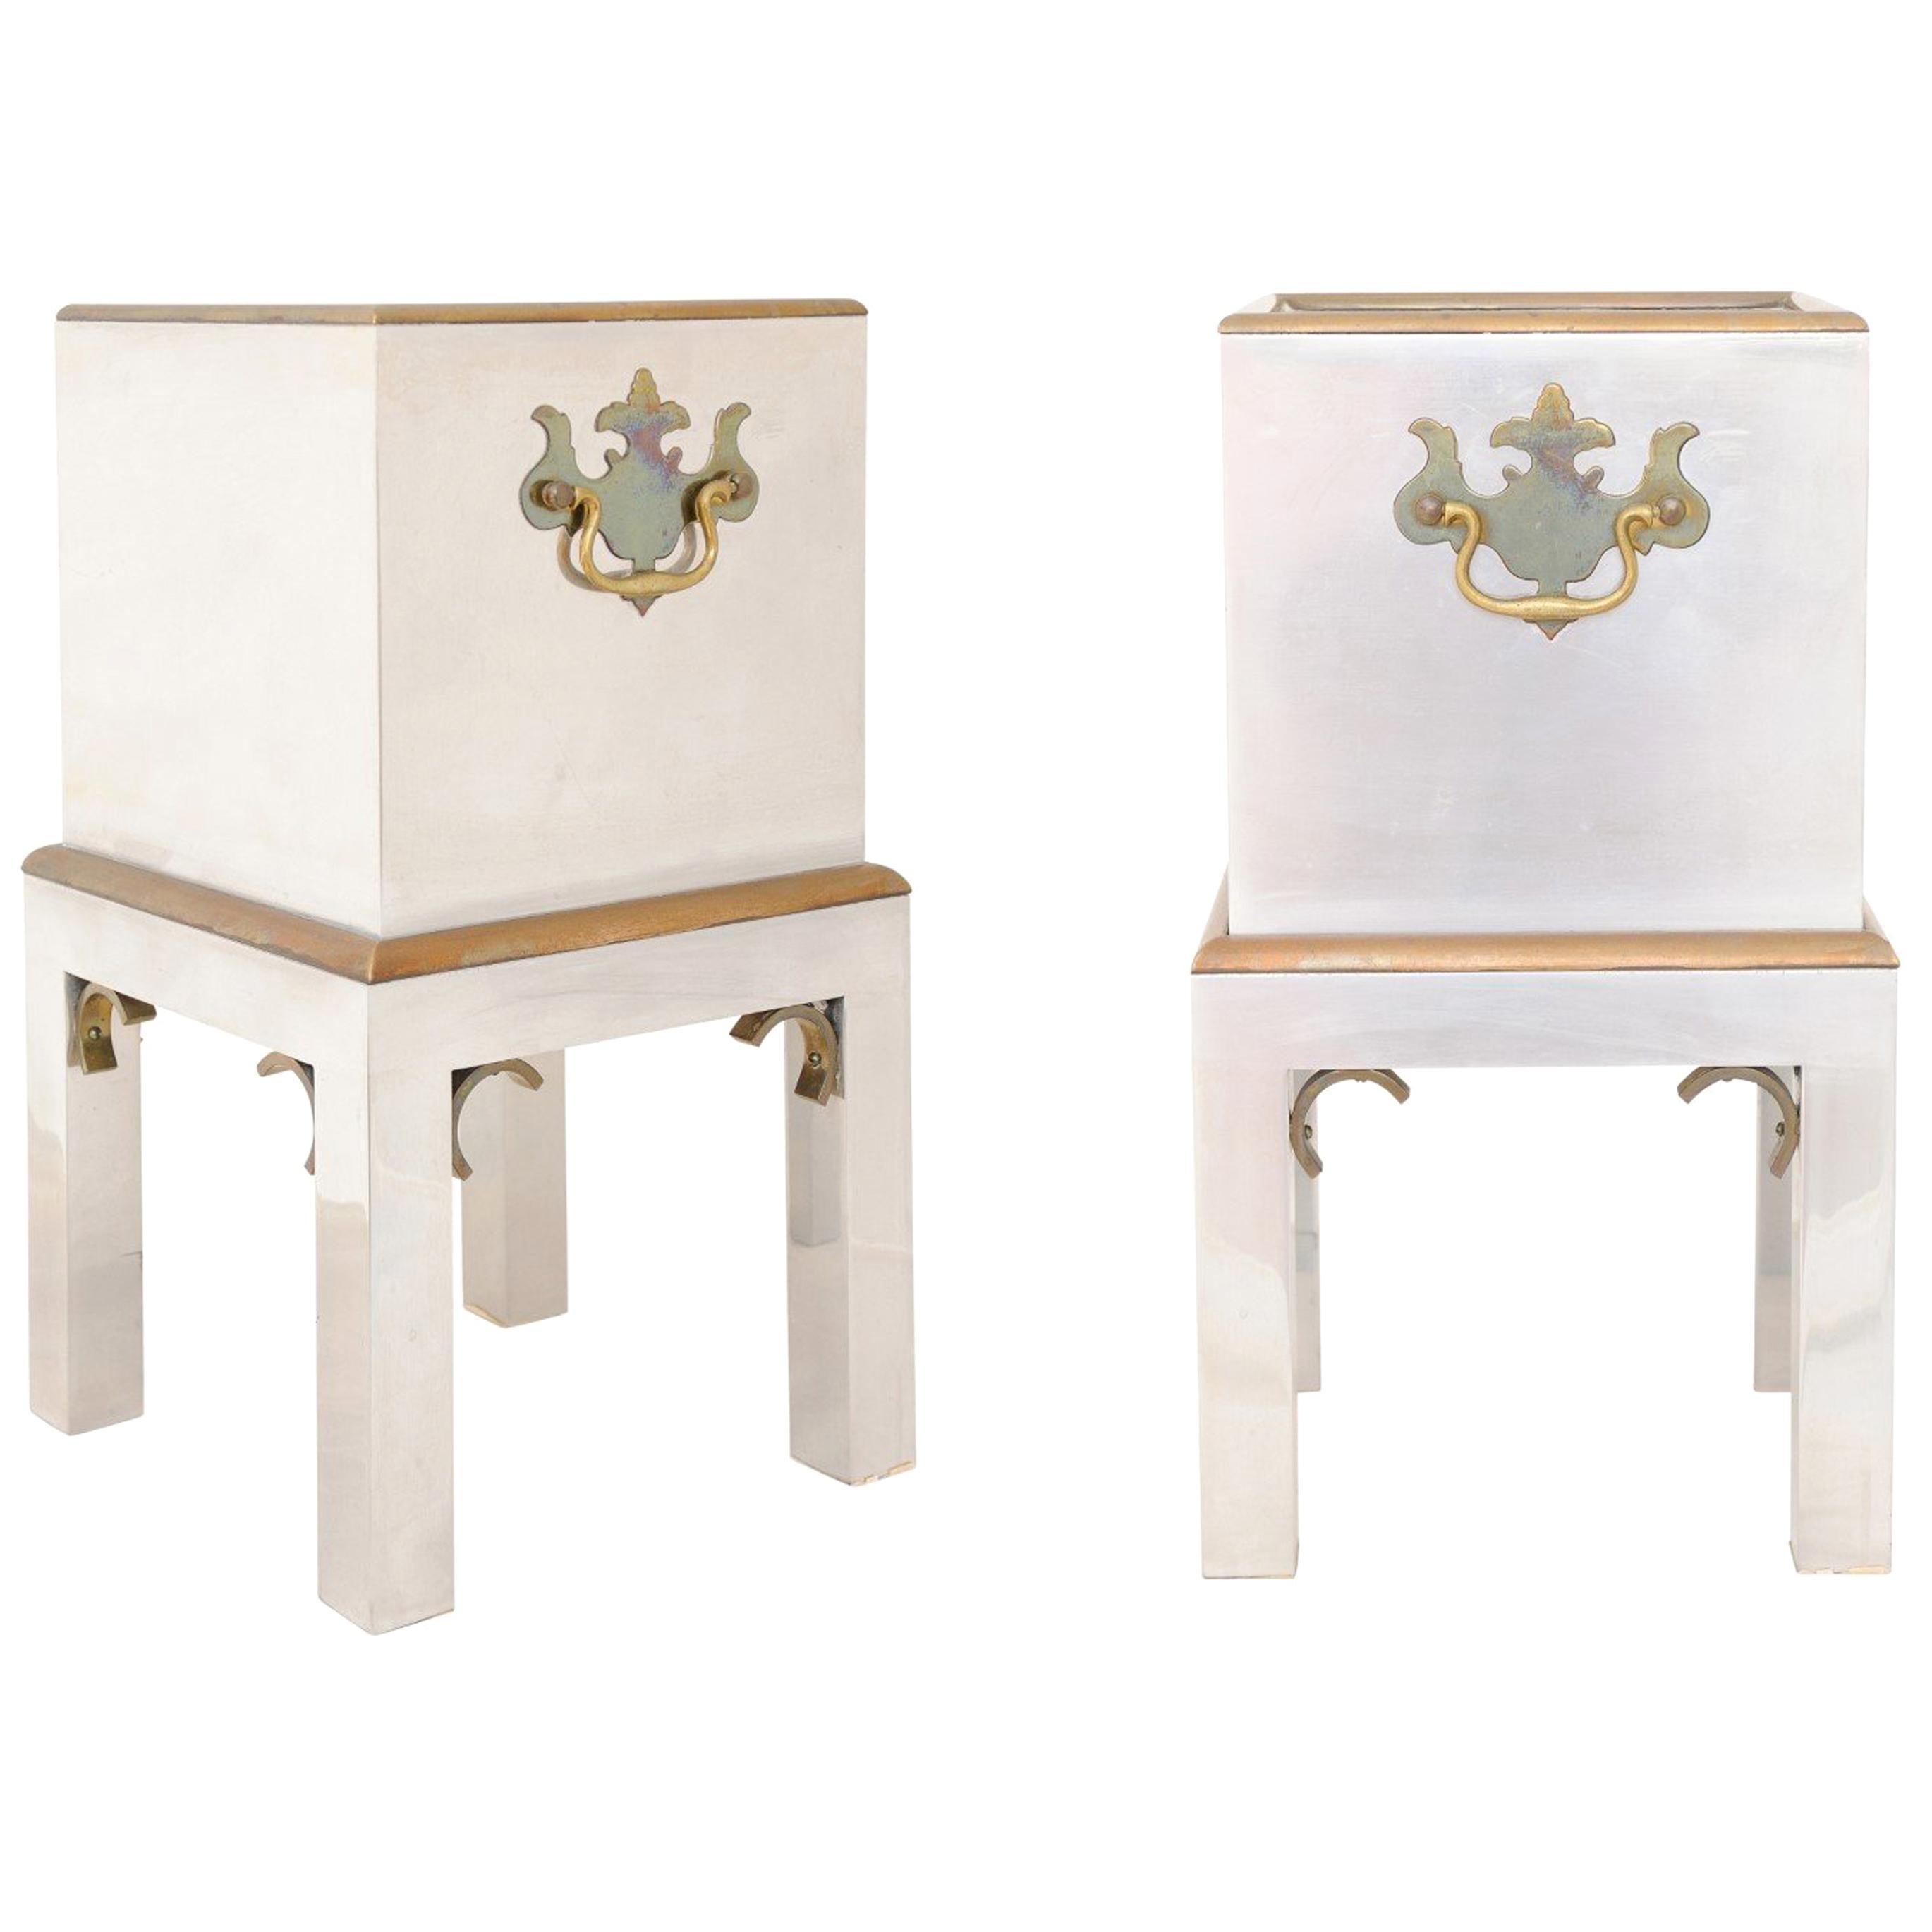 Pair of Petite Italian Vintage Steel and Brass Boxes on Stands from the 1970s